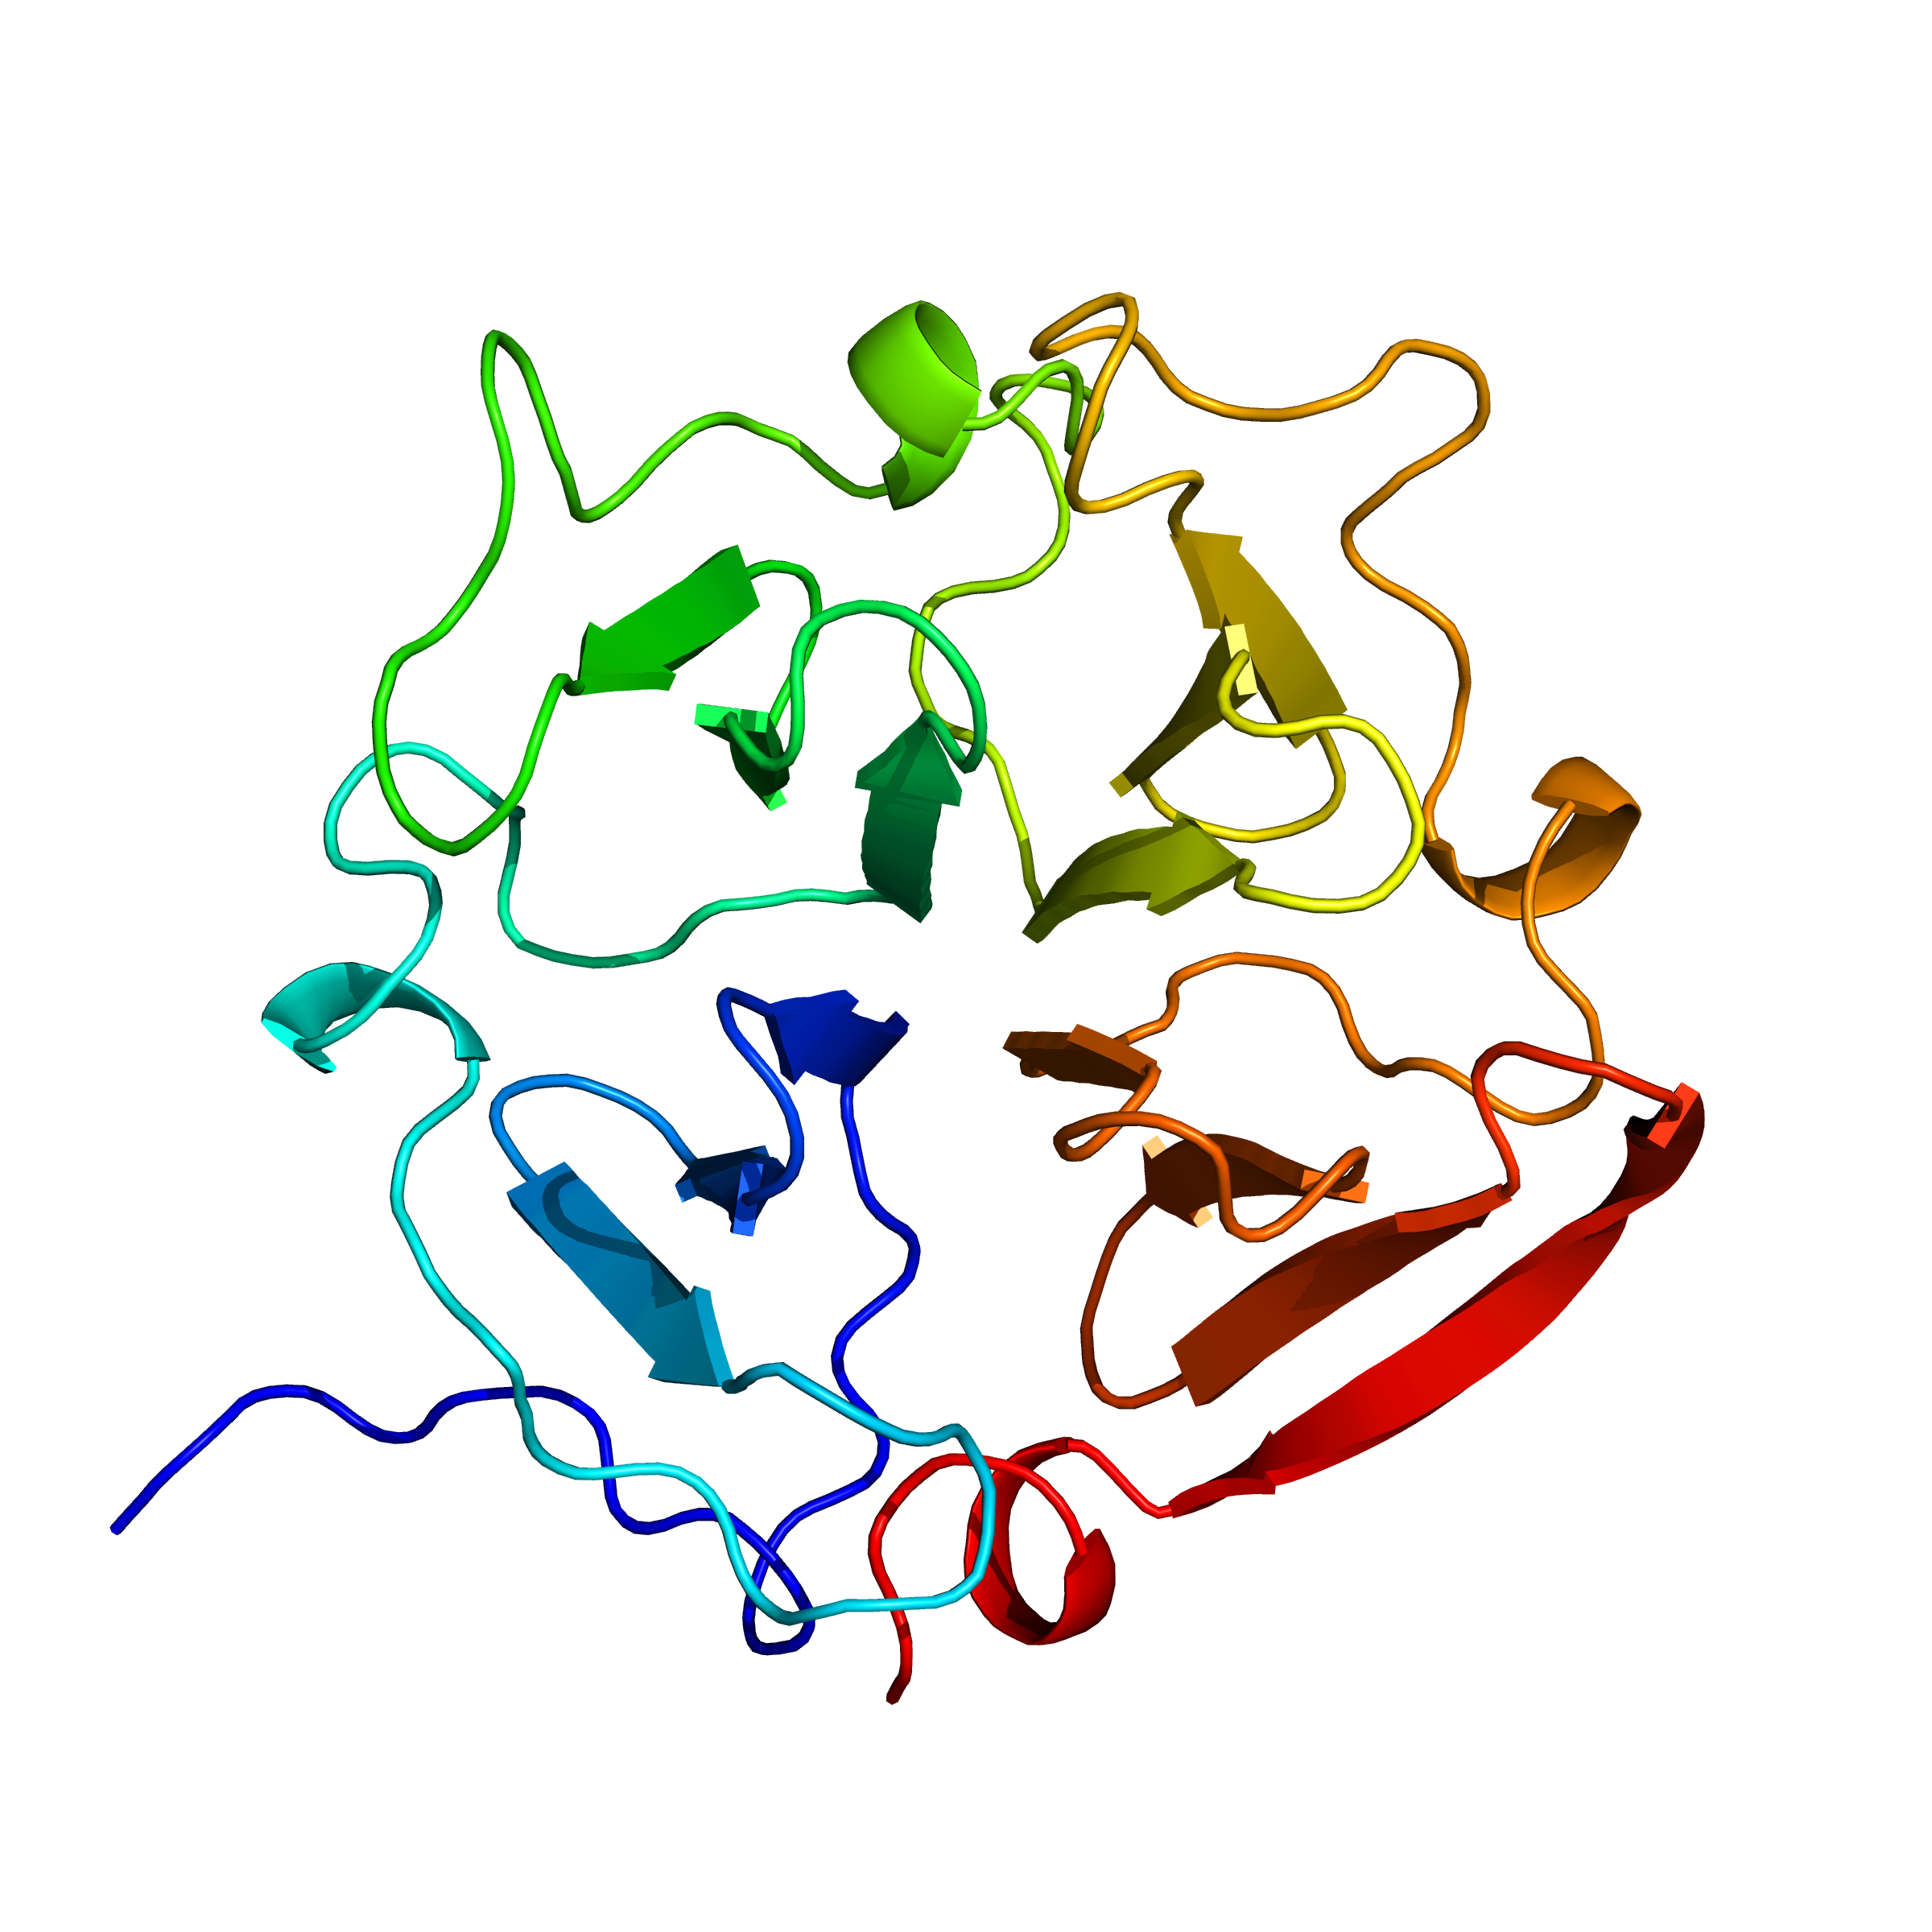 mmp2_hpx | recombinant proteins offer